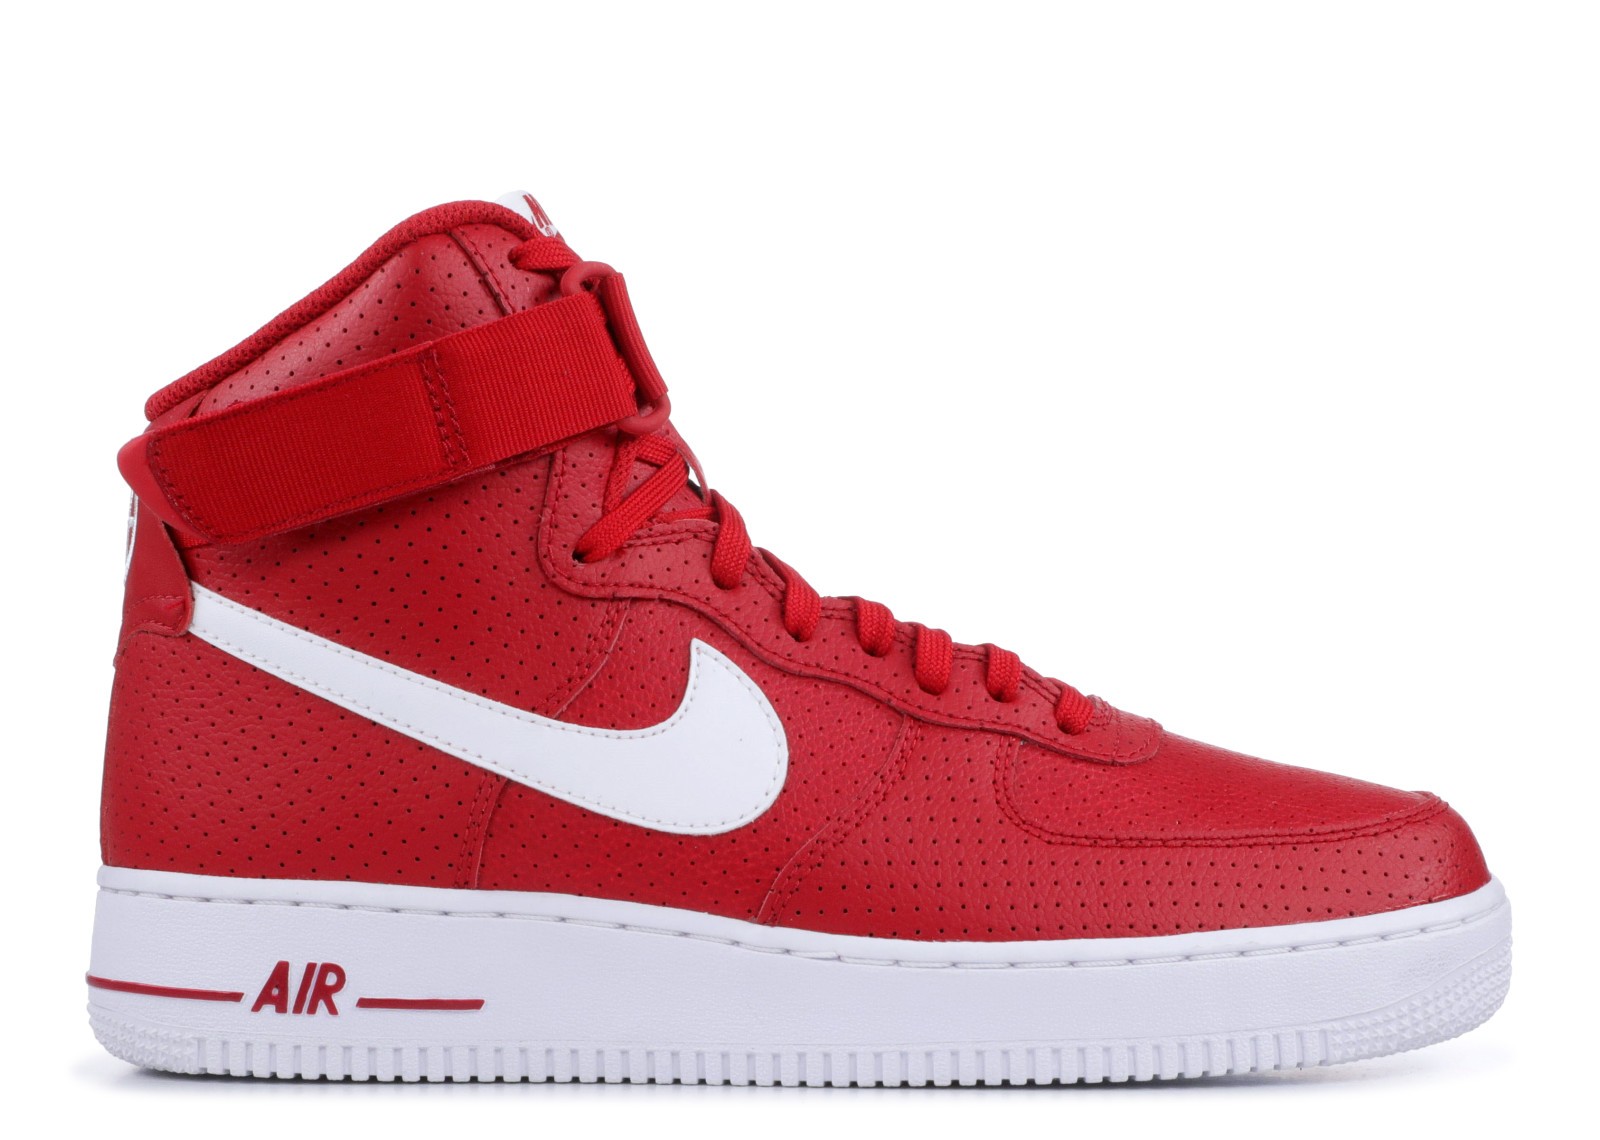 Nike Air Force 1 High Gym Red Perforated 315121-606 - Febshoe